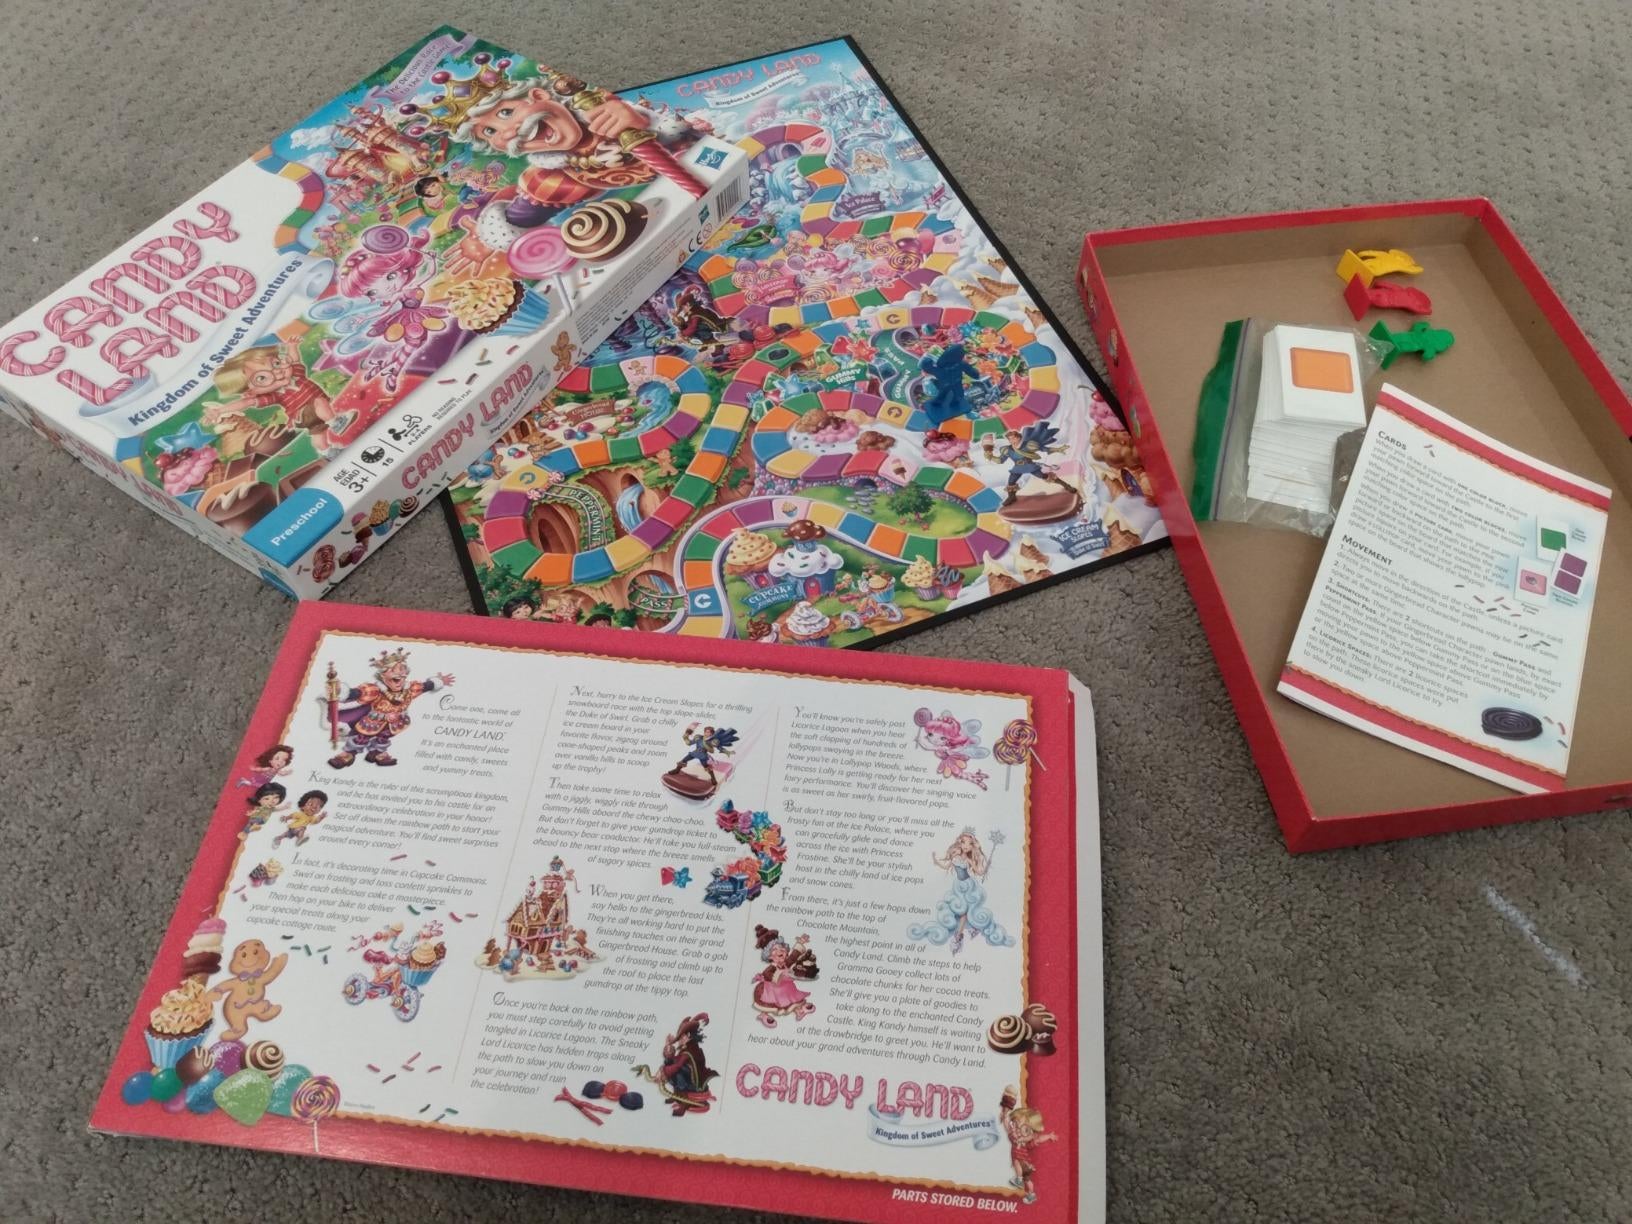 Reviewer image of Candy Land game board, game pieces, and instructions on carpet